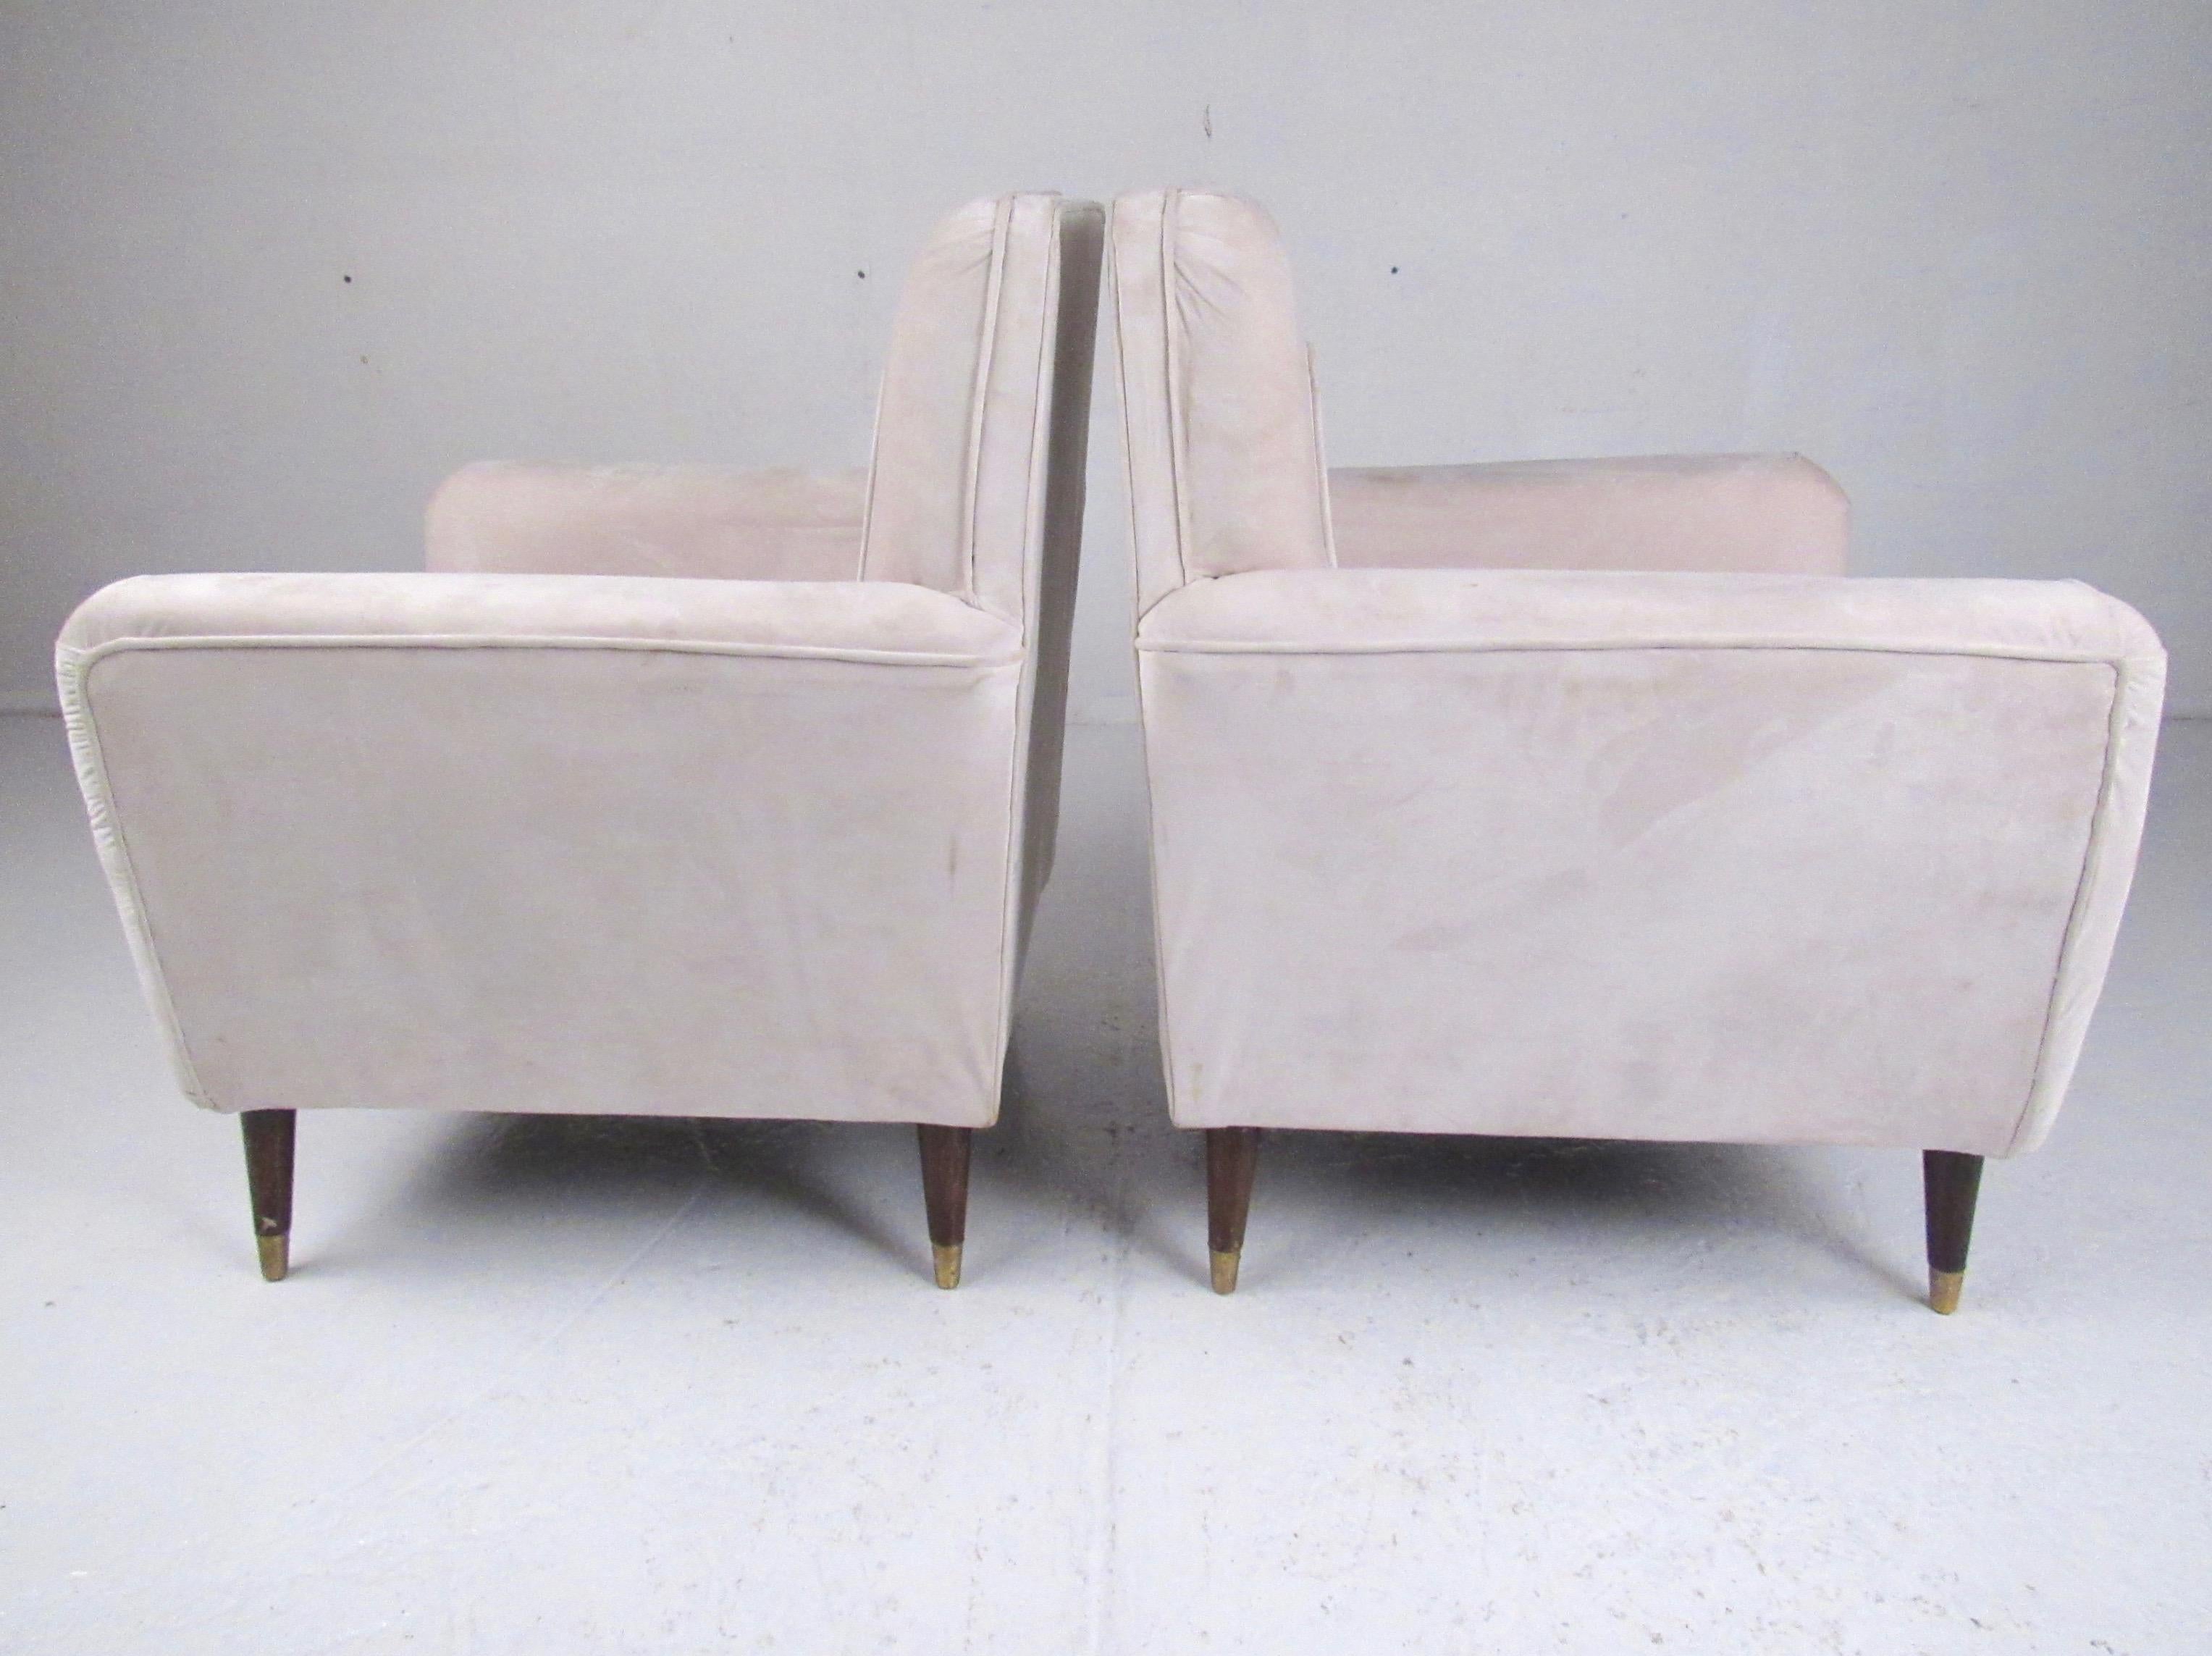 Pair of Italian Modern Upholstered Armchairs  In Good Condition For Sale In Brooklyn, NY